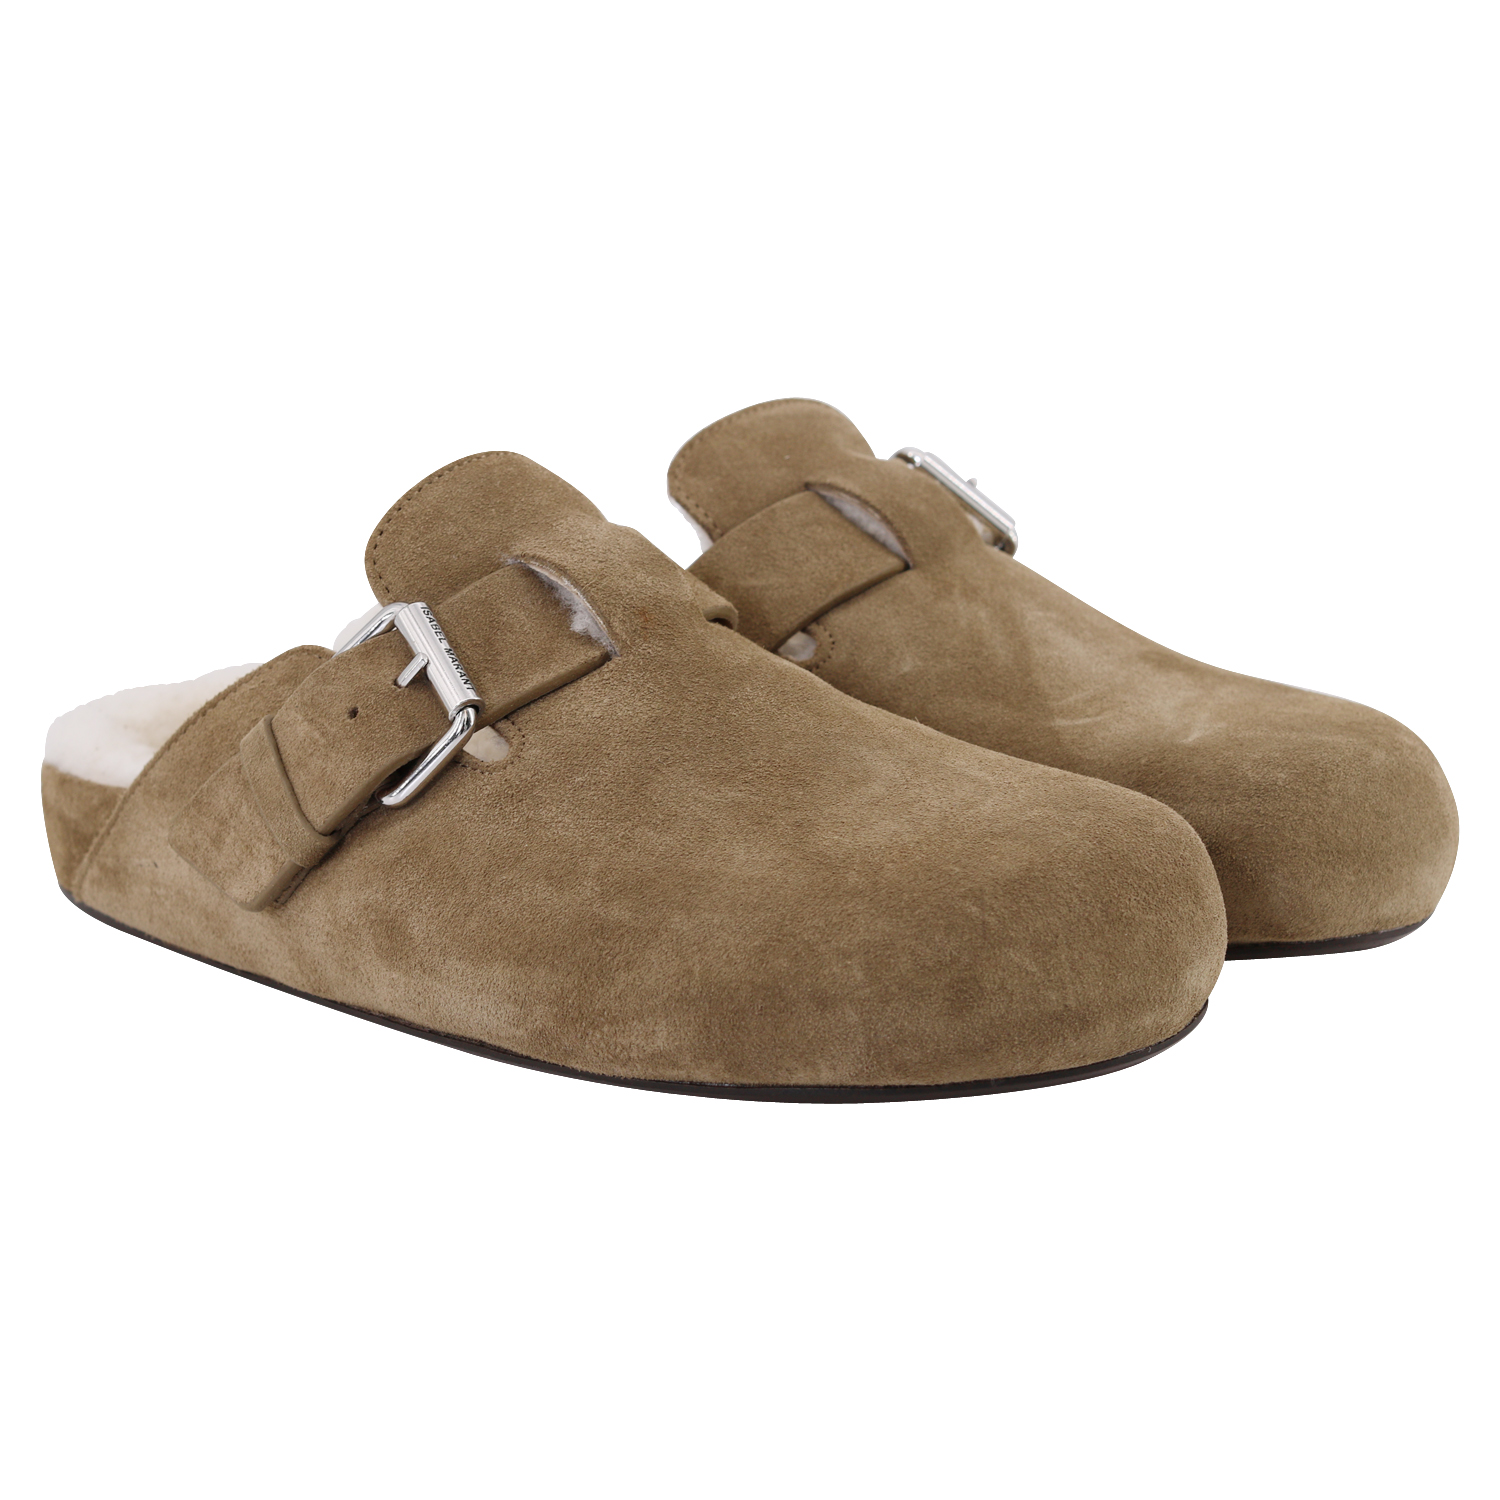 Isabel Marant Shearling Sandals Mirvin Taupe Suede 38